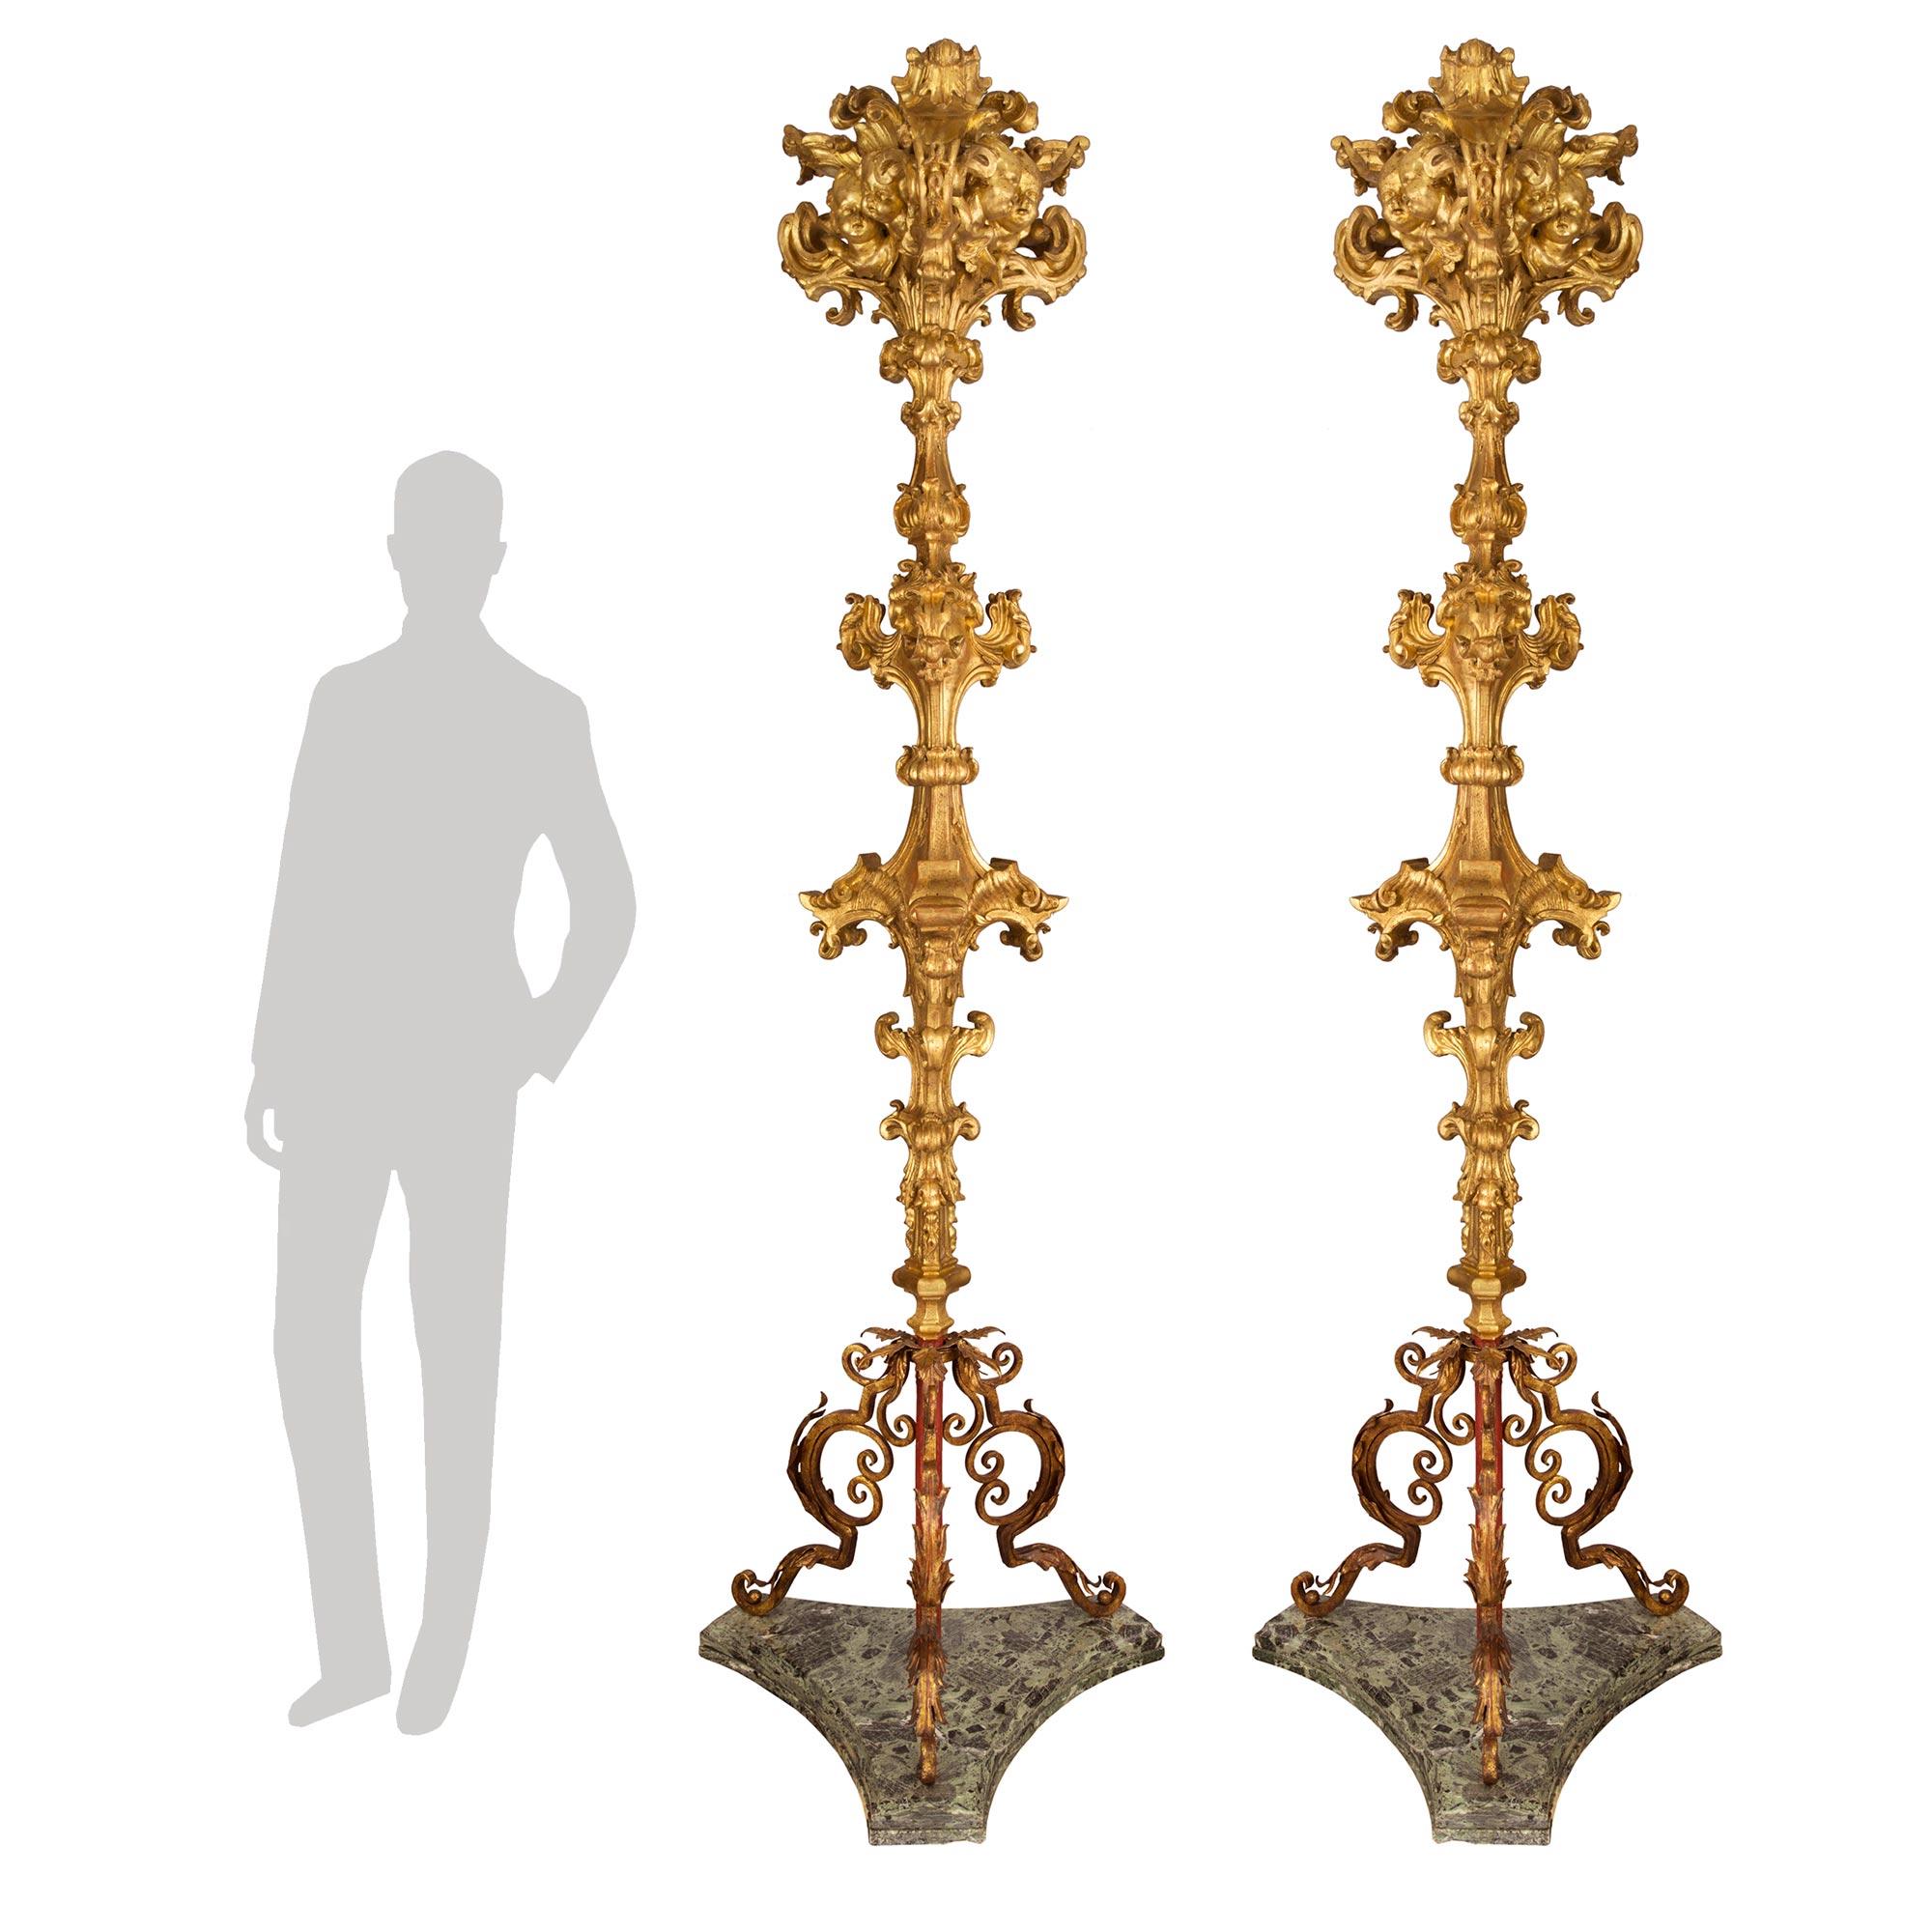 A sensational and rare pair of Italian 17th-century Baroque period giltwood, gilt metal and Verde Antico marble torchières floor lamps. Each large-scale floor lamp is raised by 19th century triangular Verde Antico marble bases with concave sides and